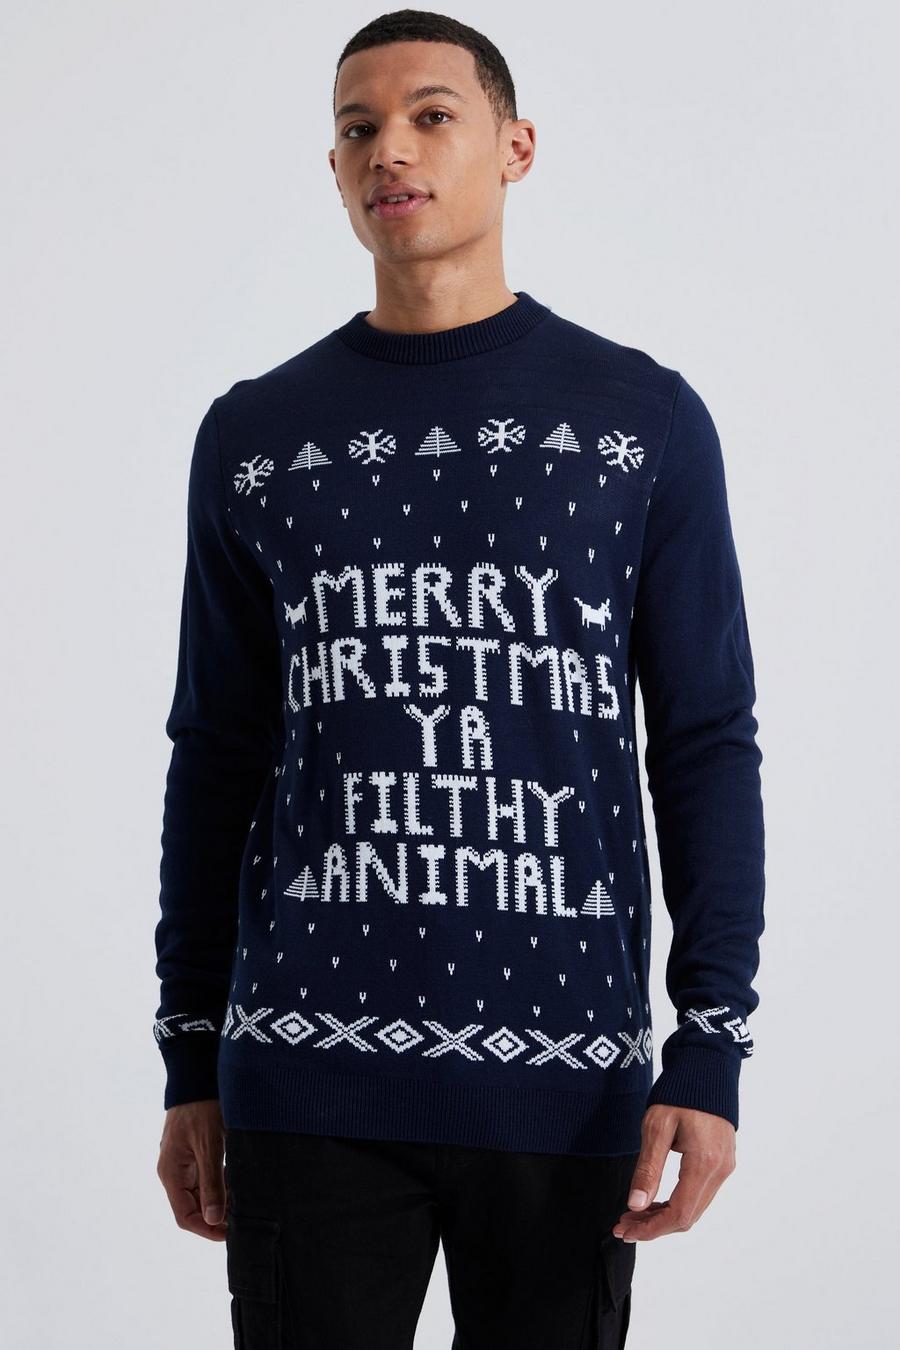 Navy Tall Ya Filthy Animal Kersttrui image number 1